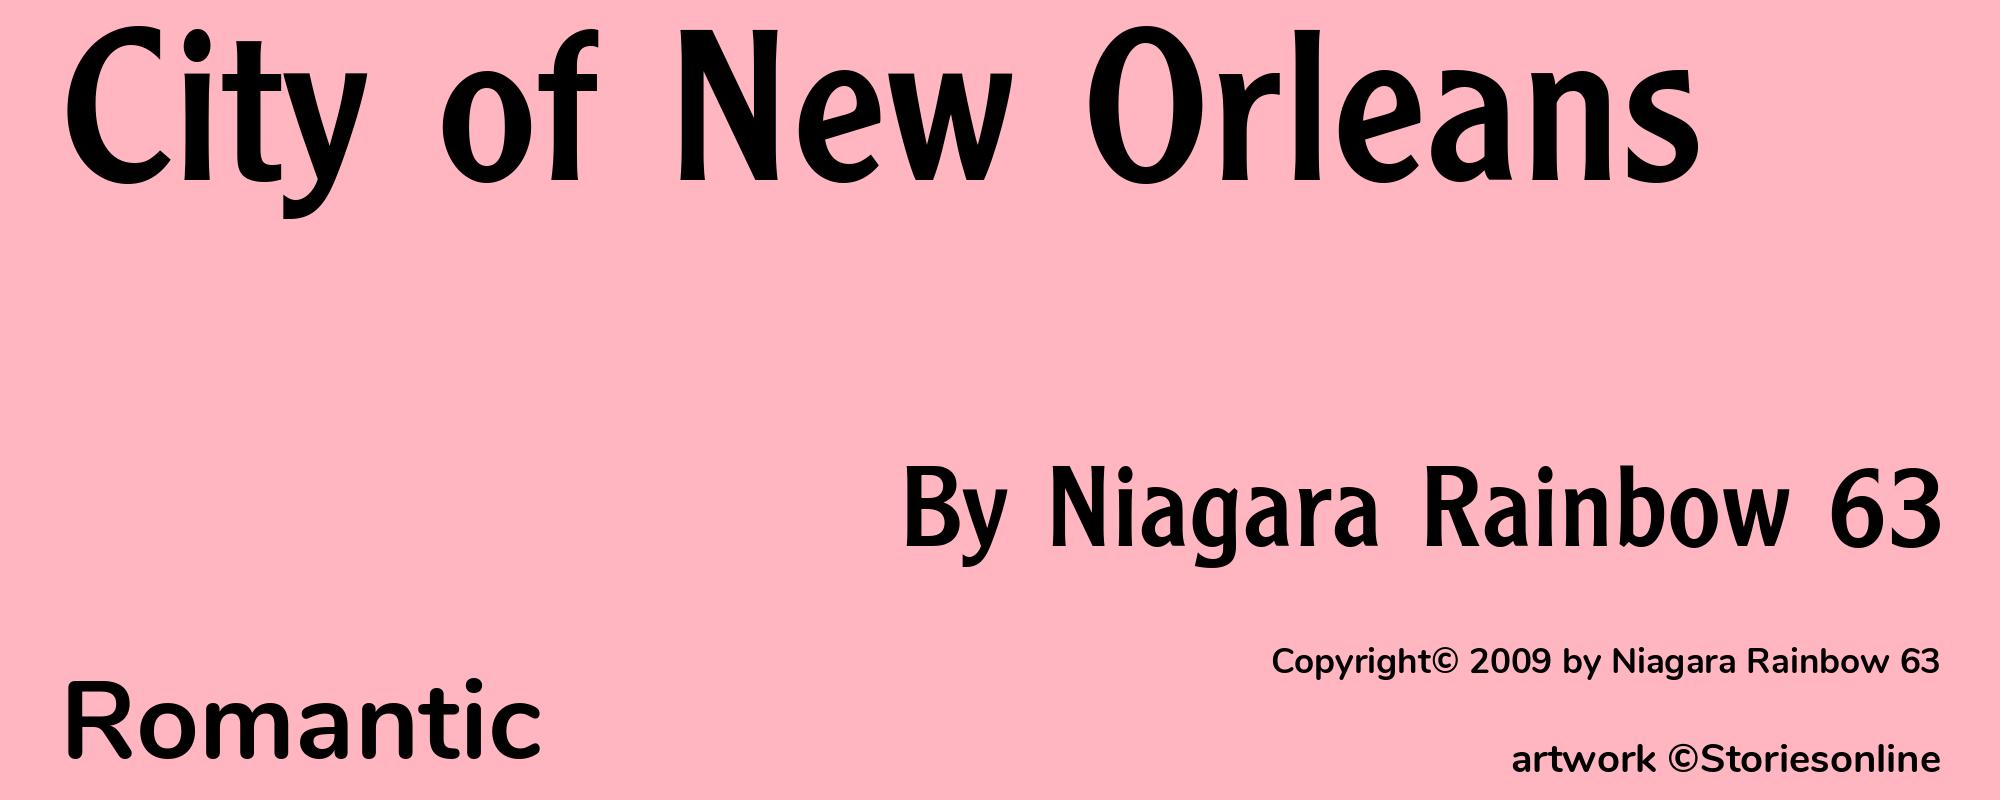 City of New Orleans - Cover